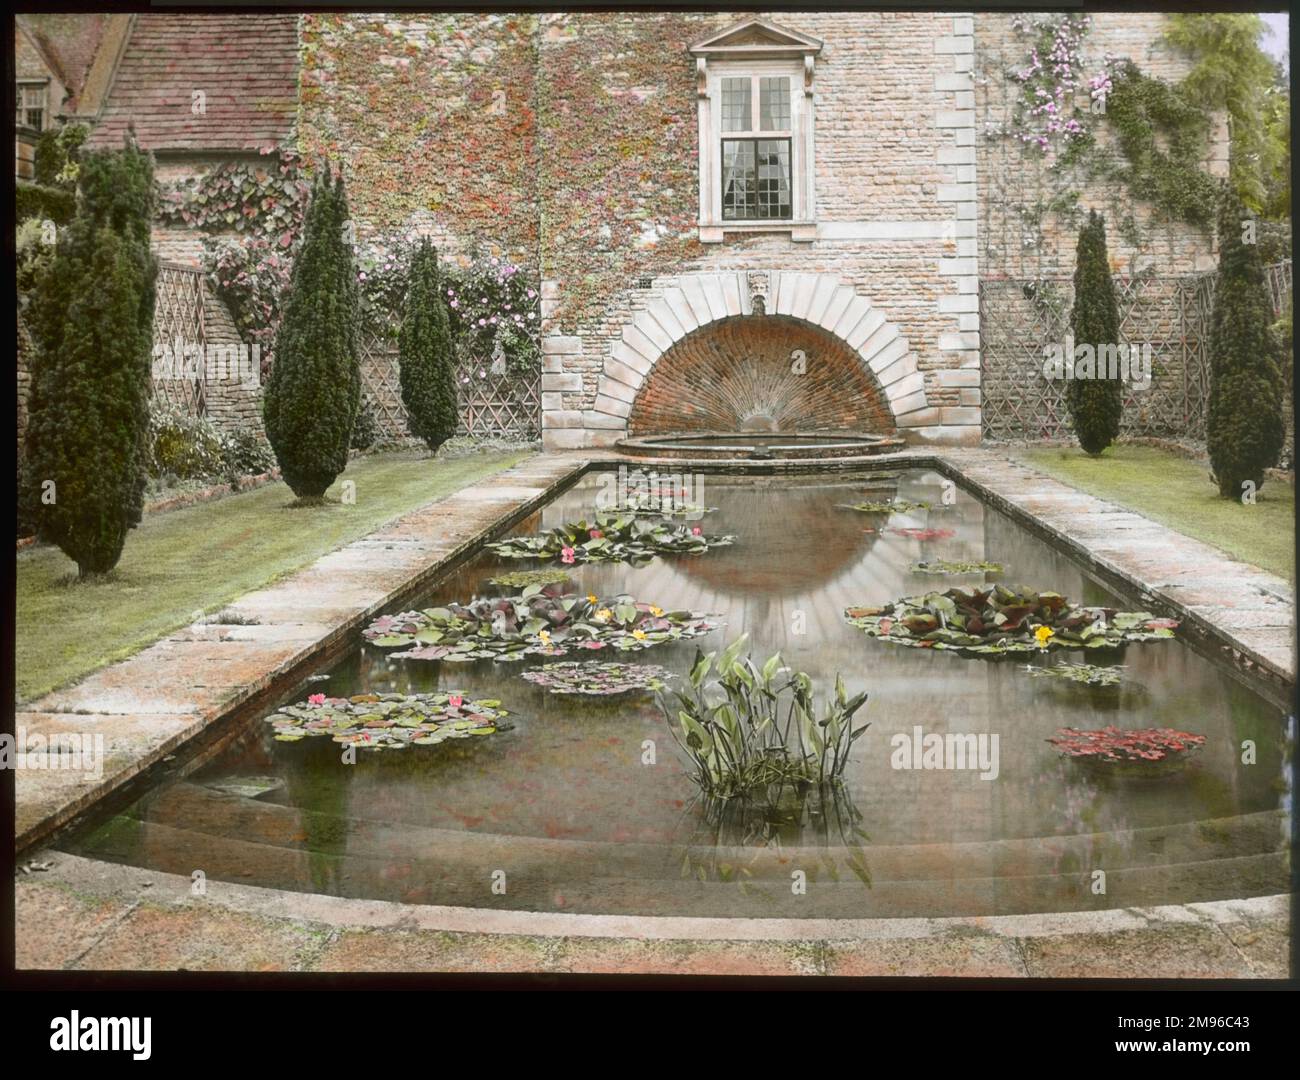 View of a lily pond in the formal gardens at Abbotswood, Stow on the Wold, Gloucestershire.  The gardens were created by Sir Edwin Lutyens. Stock Photo